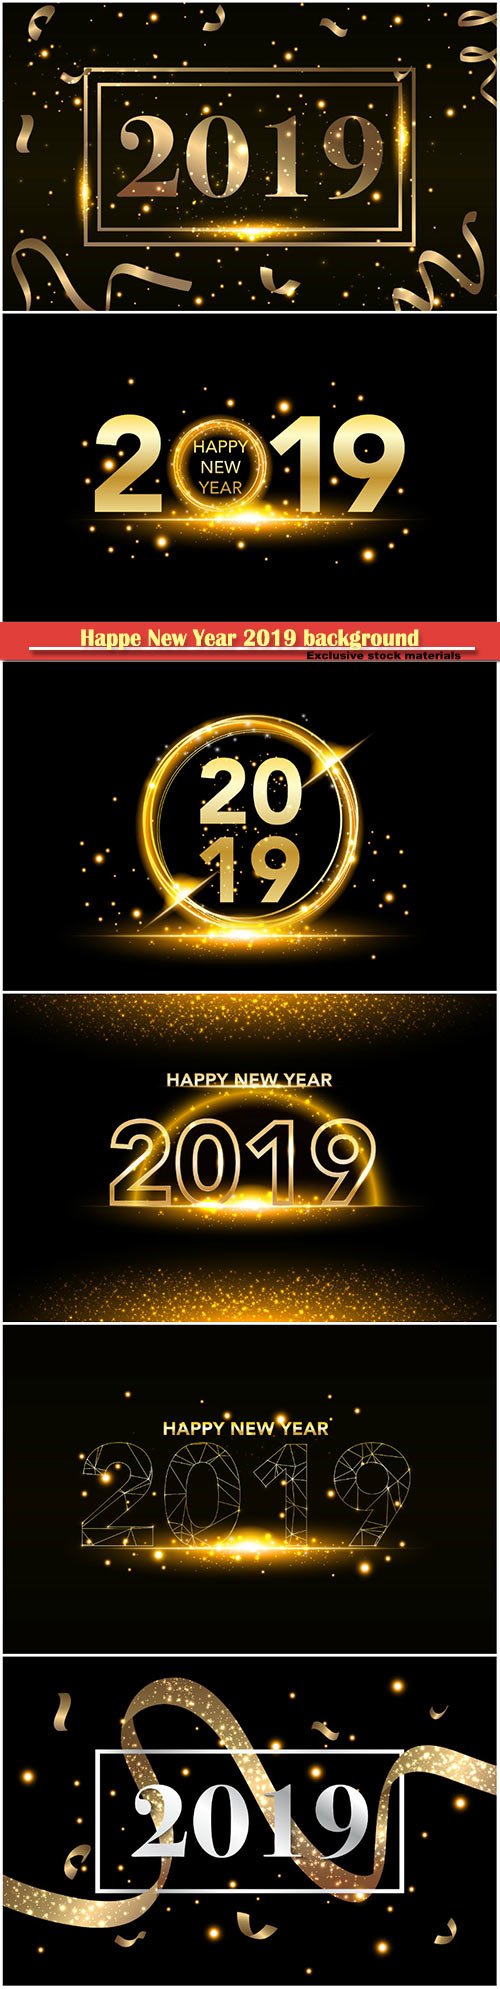 Happe New Year 2019 vector background